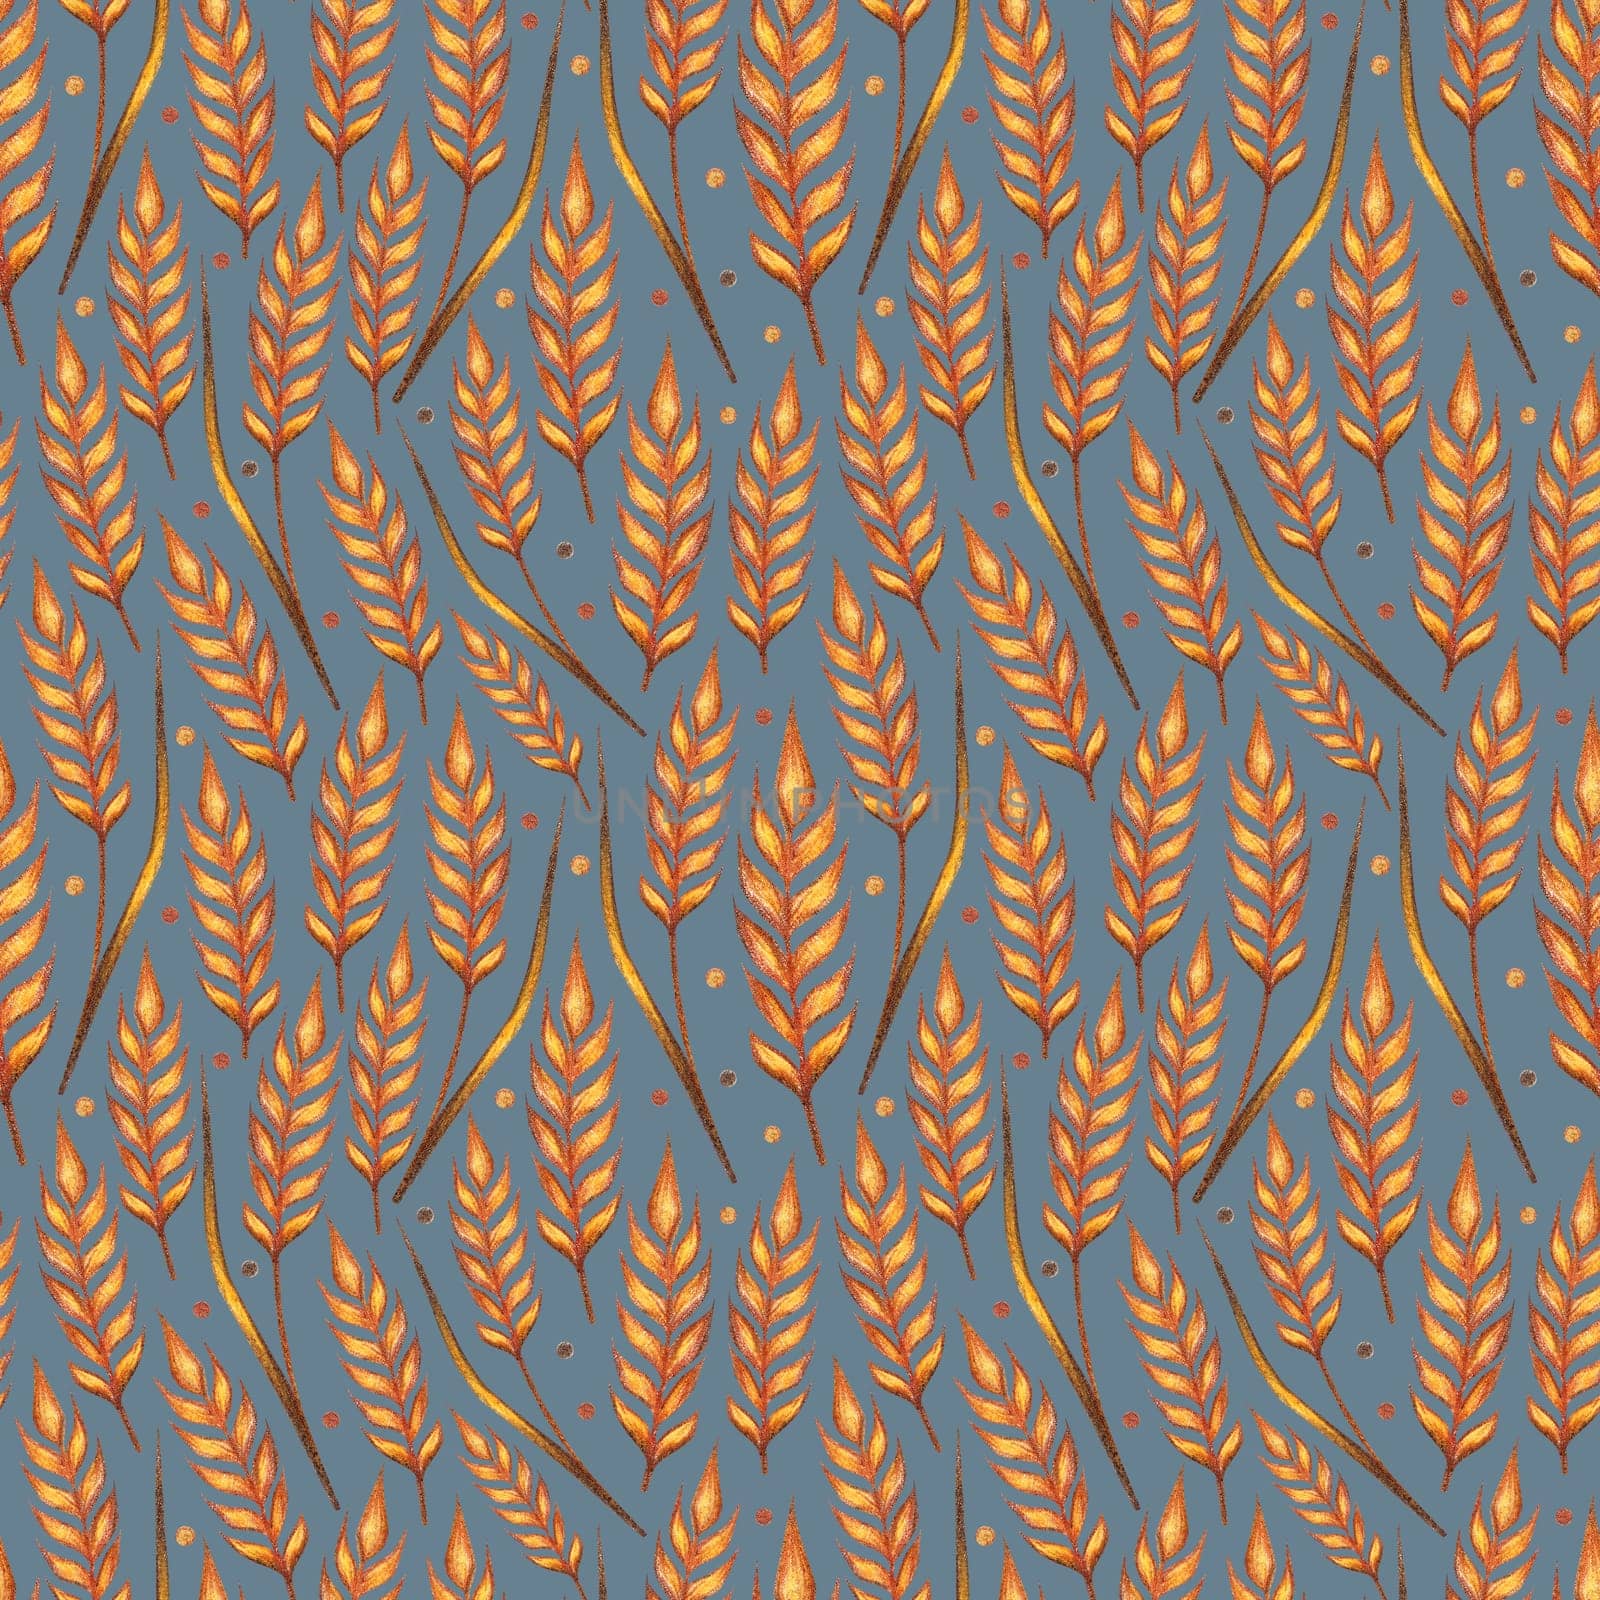 Ear of wheat watercolor seamless pattern. Hand drawn sketched illustration. Concept for agriculture, organic cereal products, harvesting grain, bakery, healthy food.